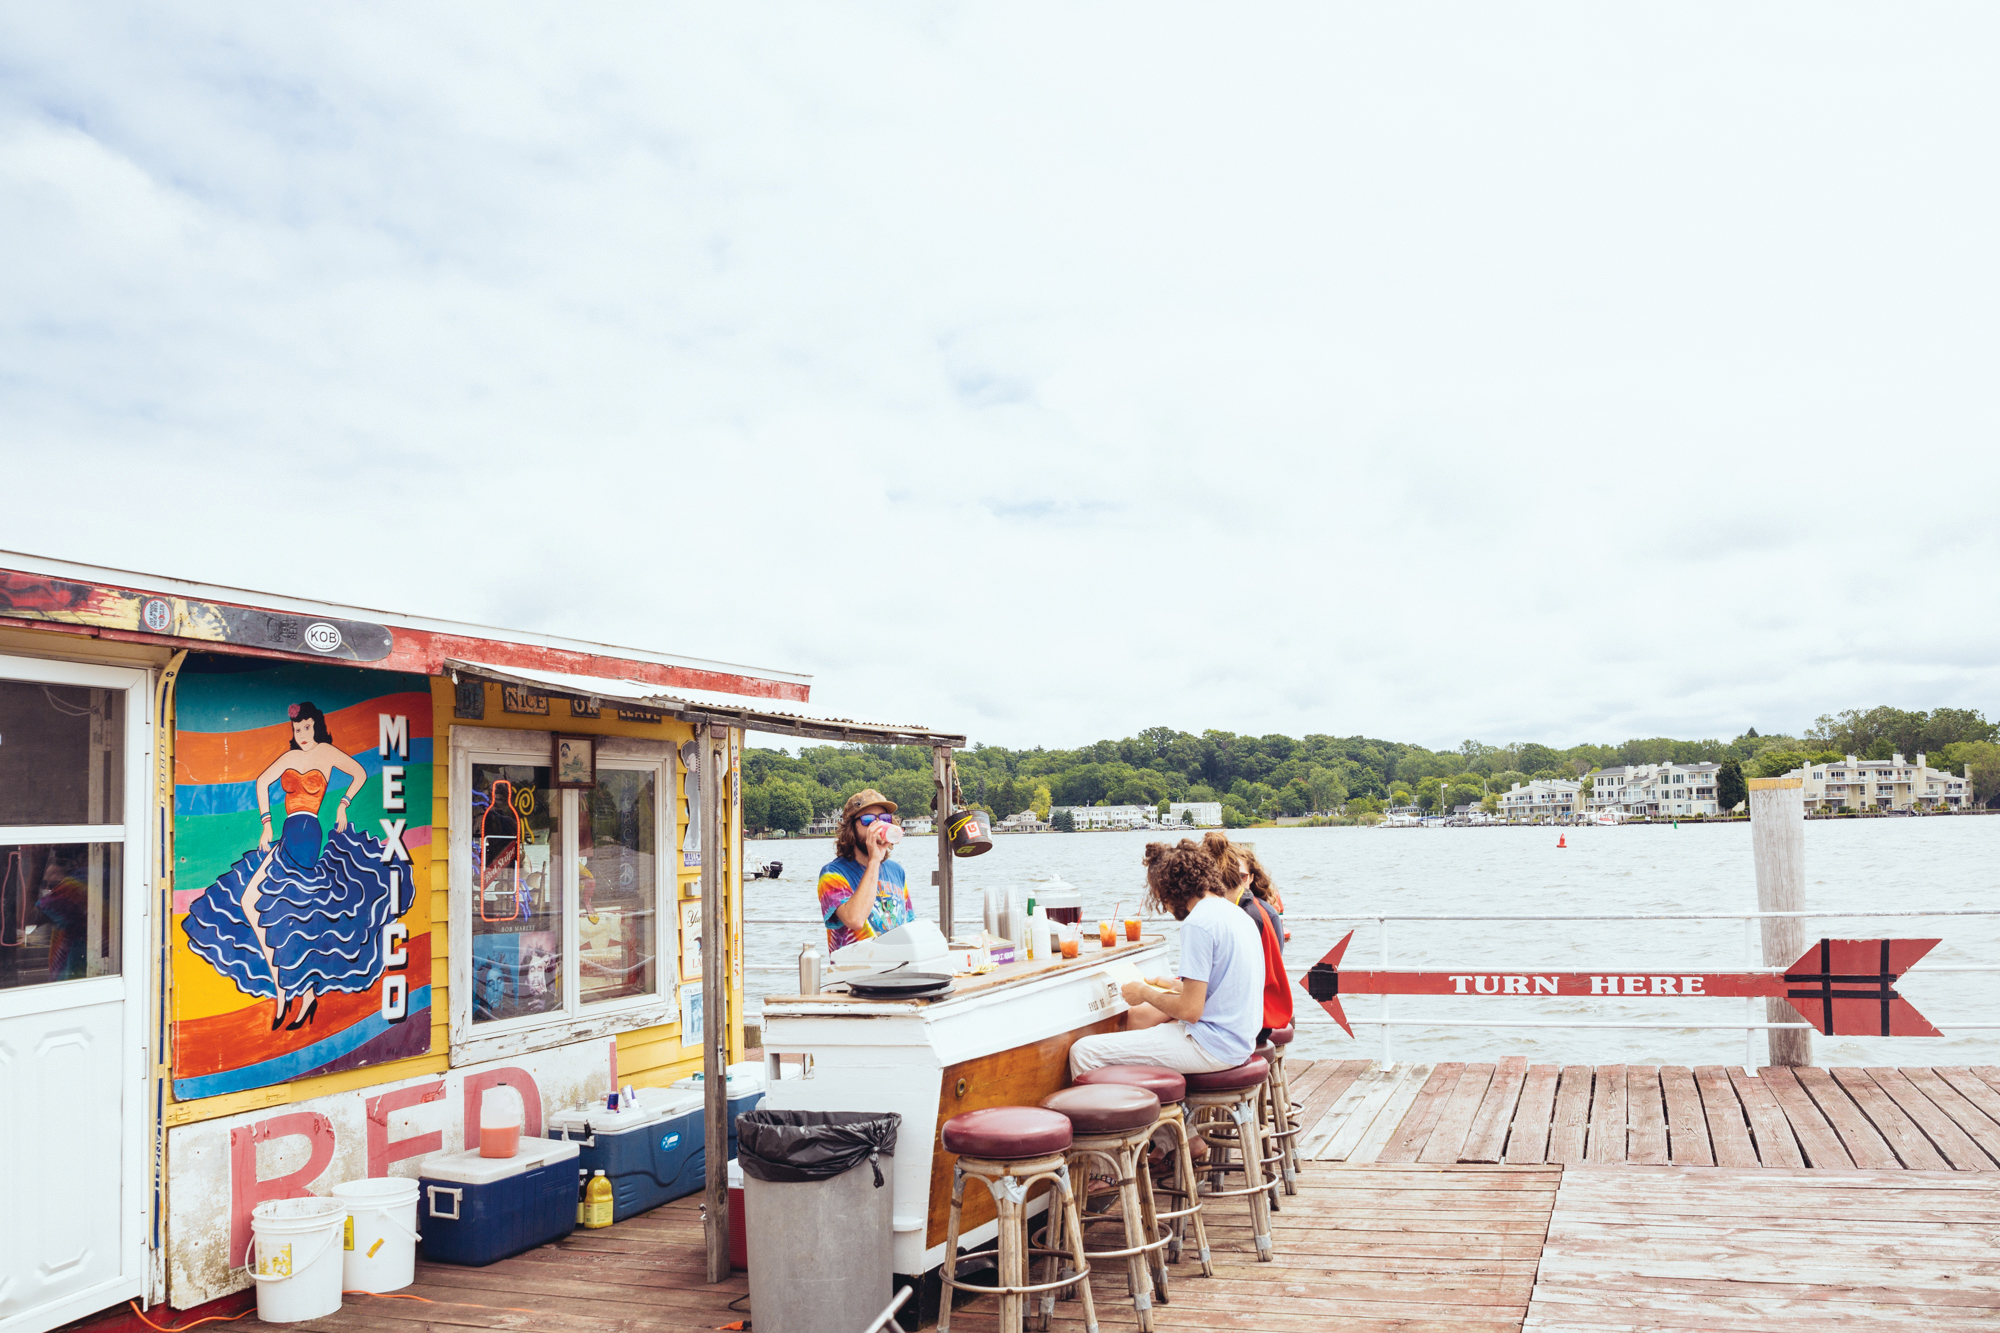 Things to do in Saugatuck, MI